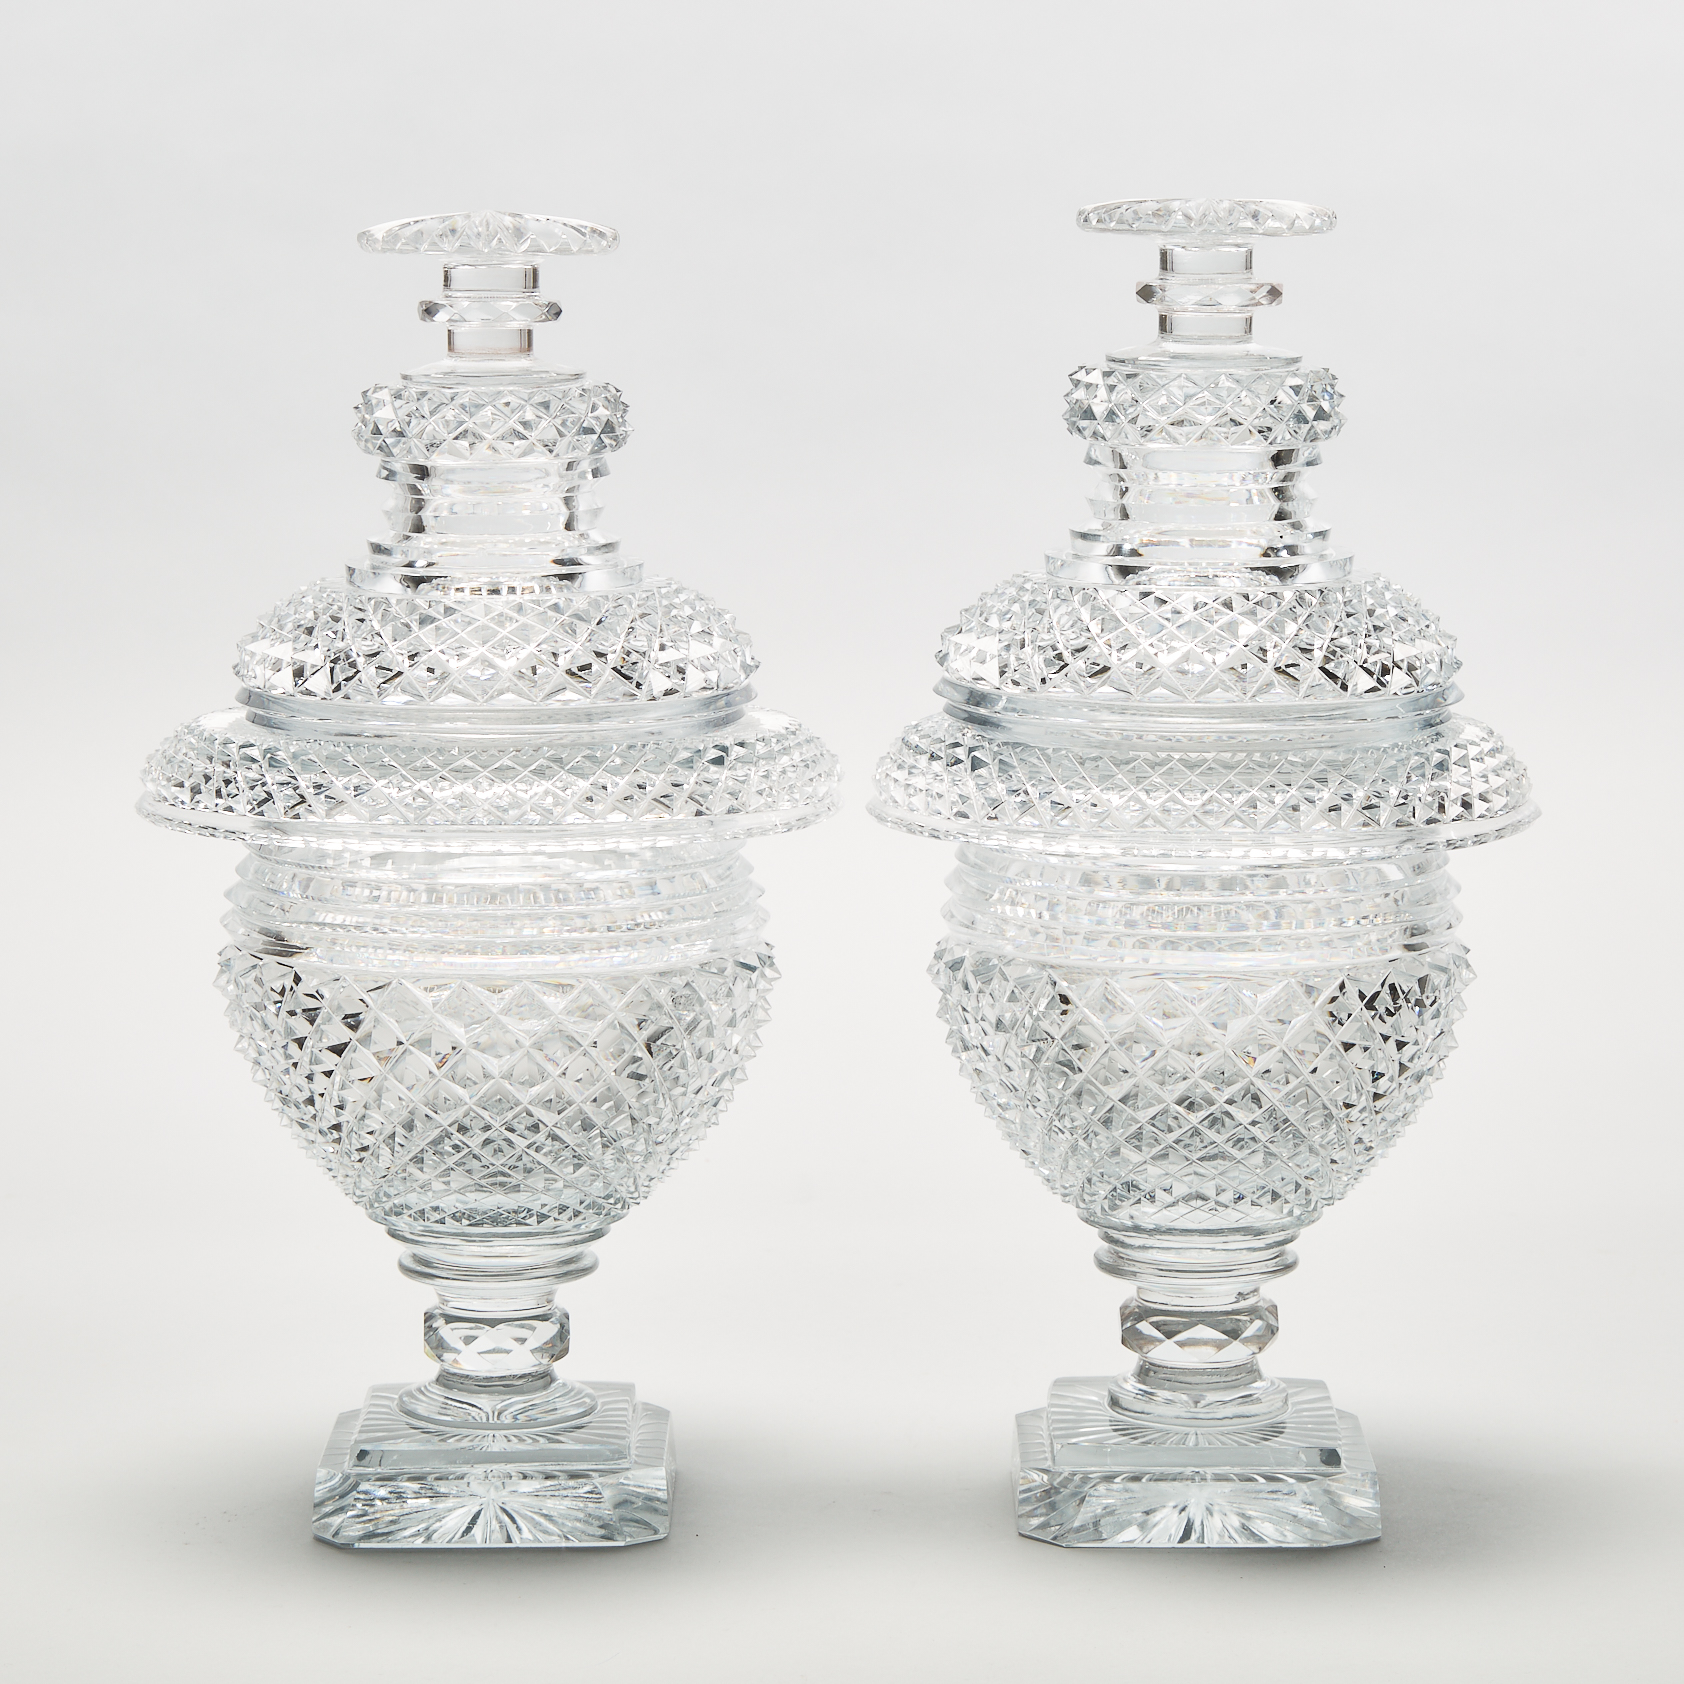 Pair of Anglo-Irish Cut Glass Sweetmeat Vases and Covers, 19th century